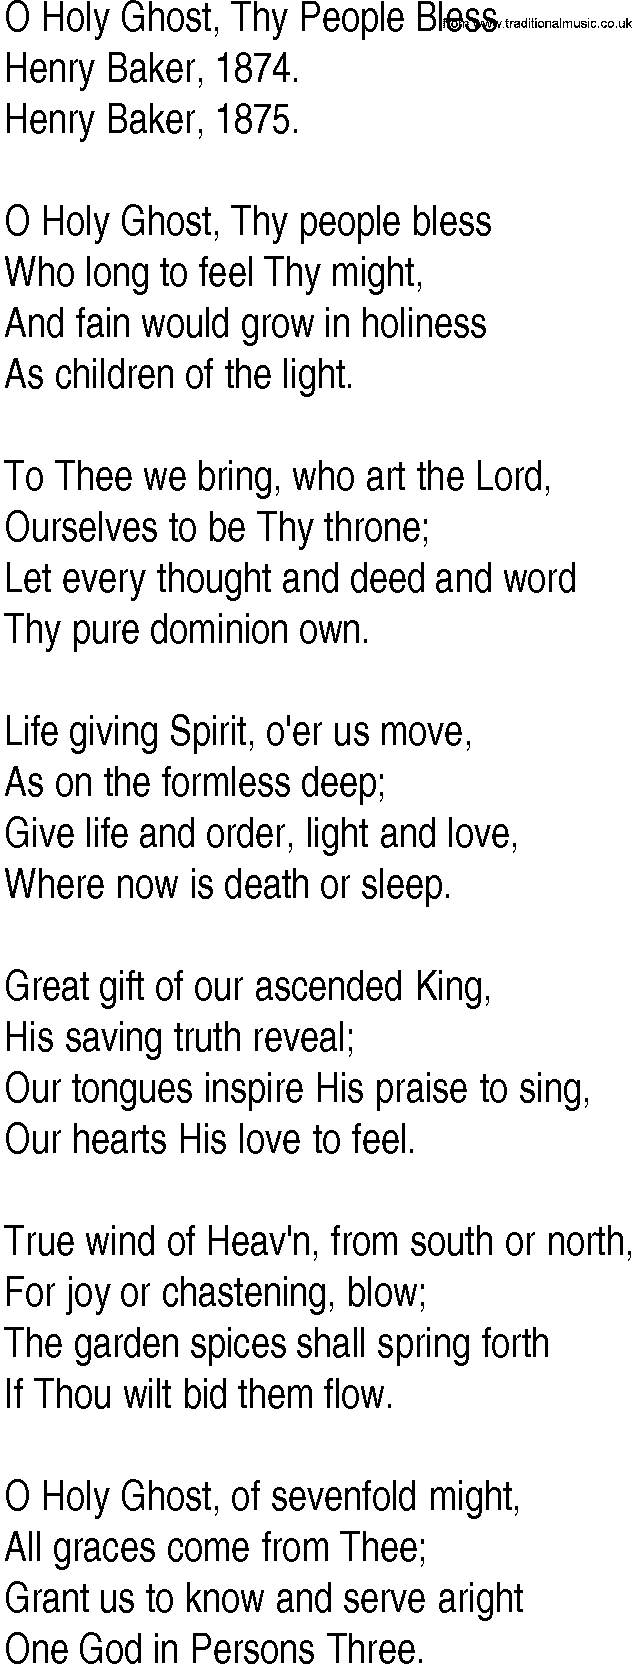 Hymn and Gospel Song: O Holy Ghost, Thy People Bless by Henry Baker lyrics